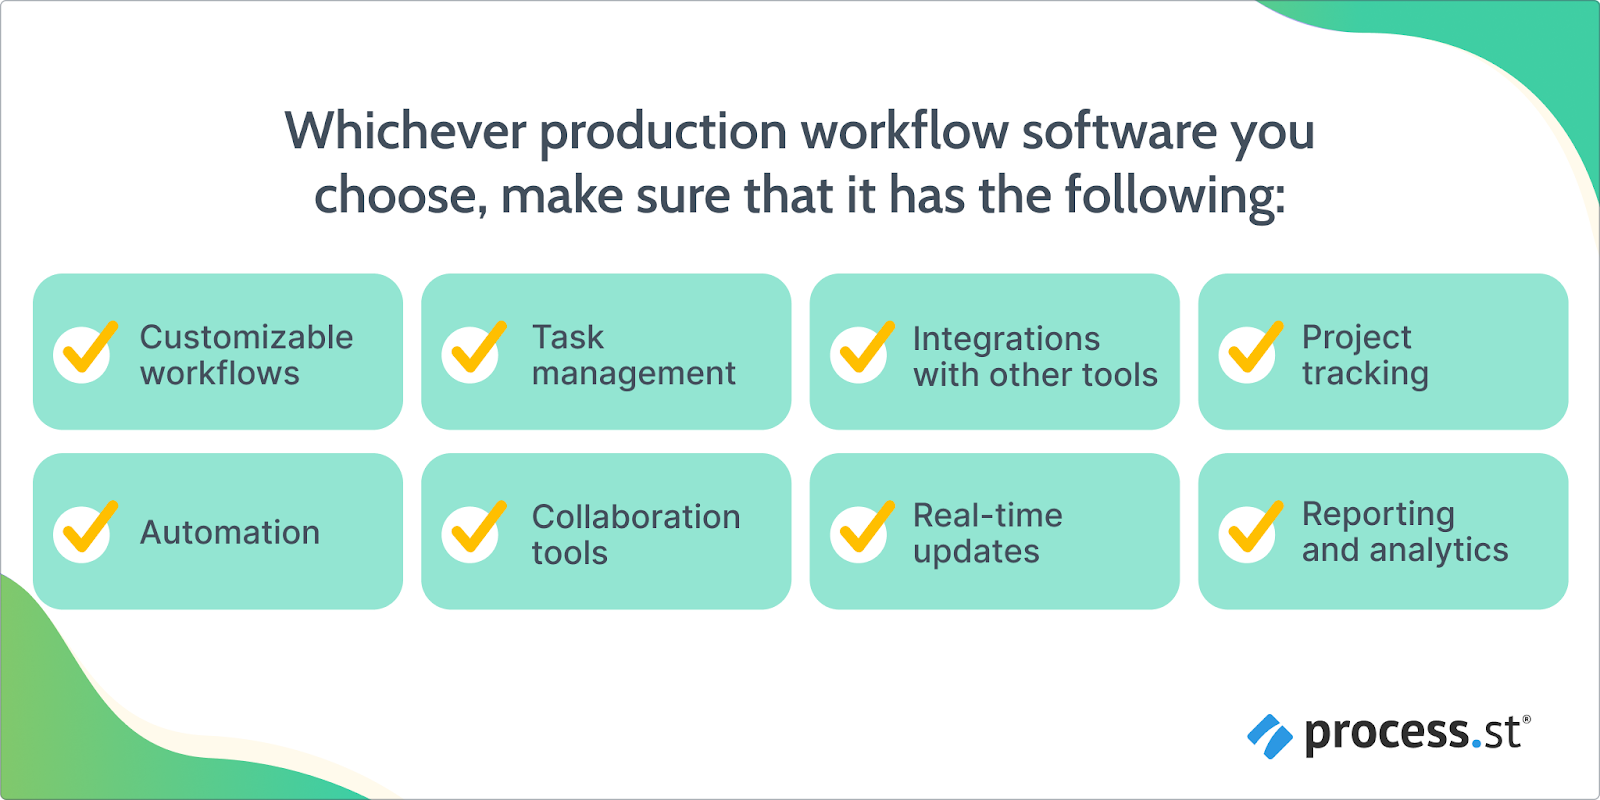 image showing the features of production workflow software